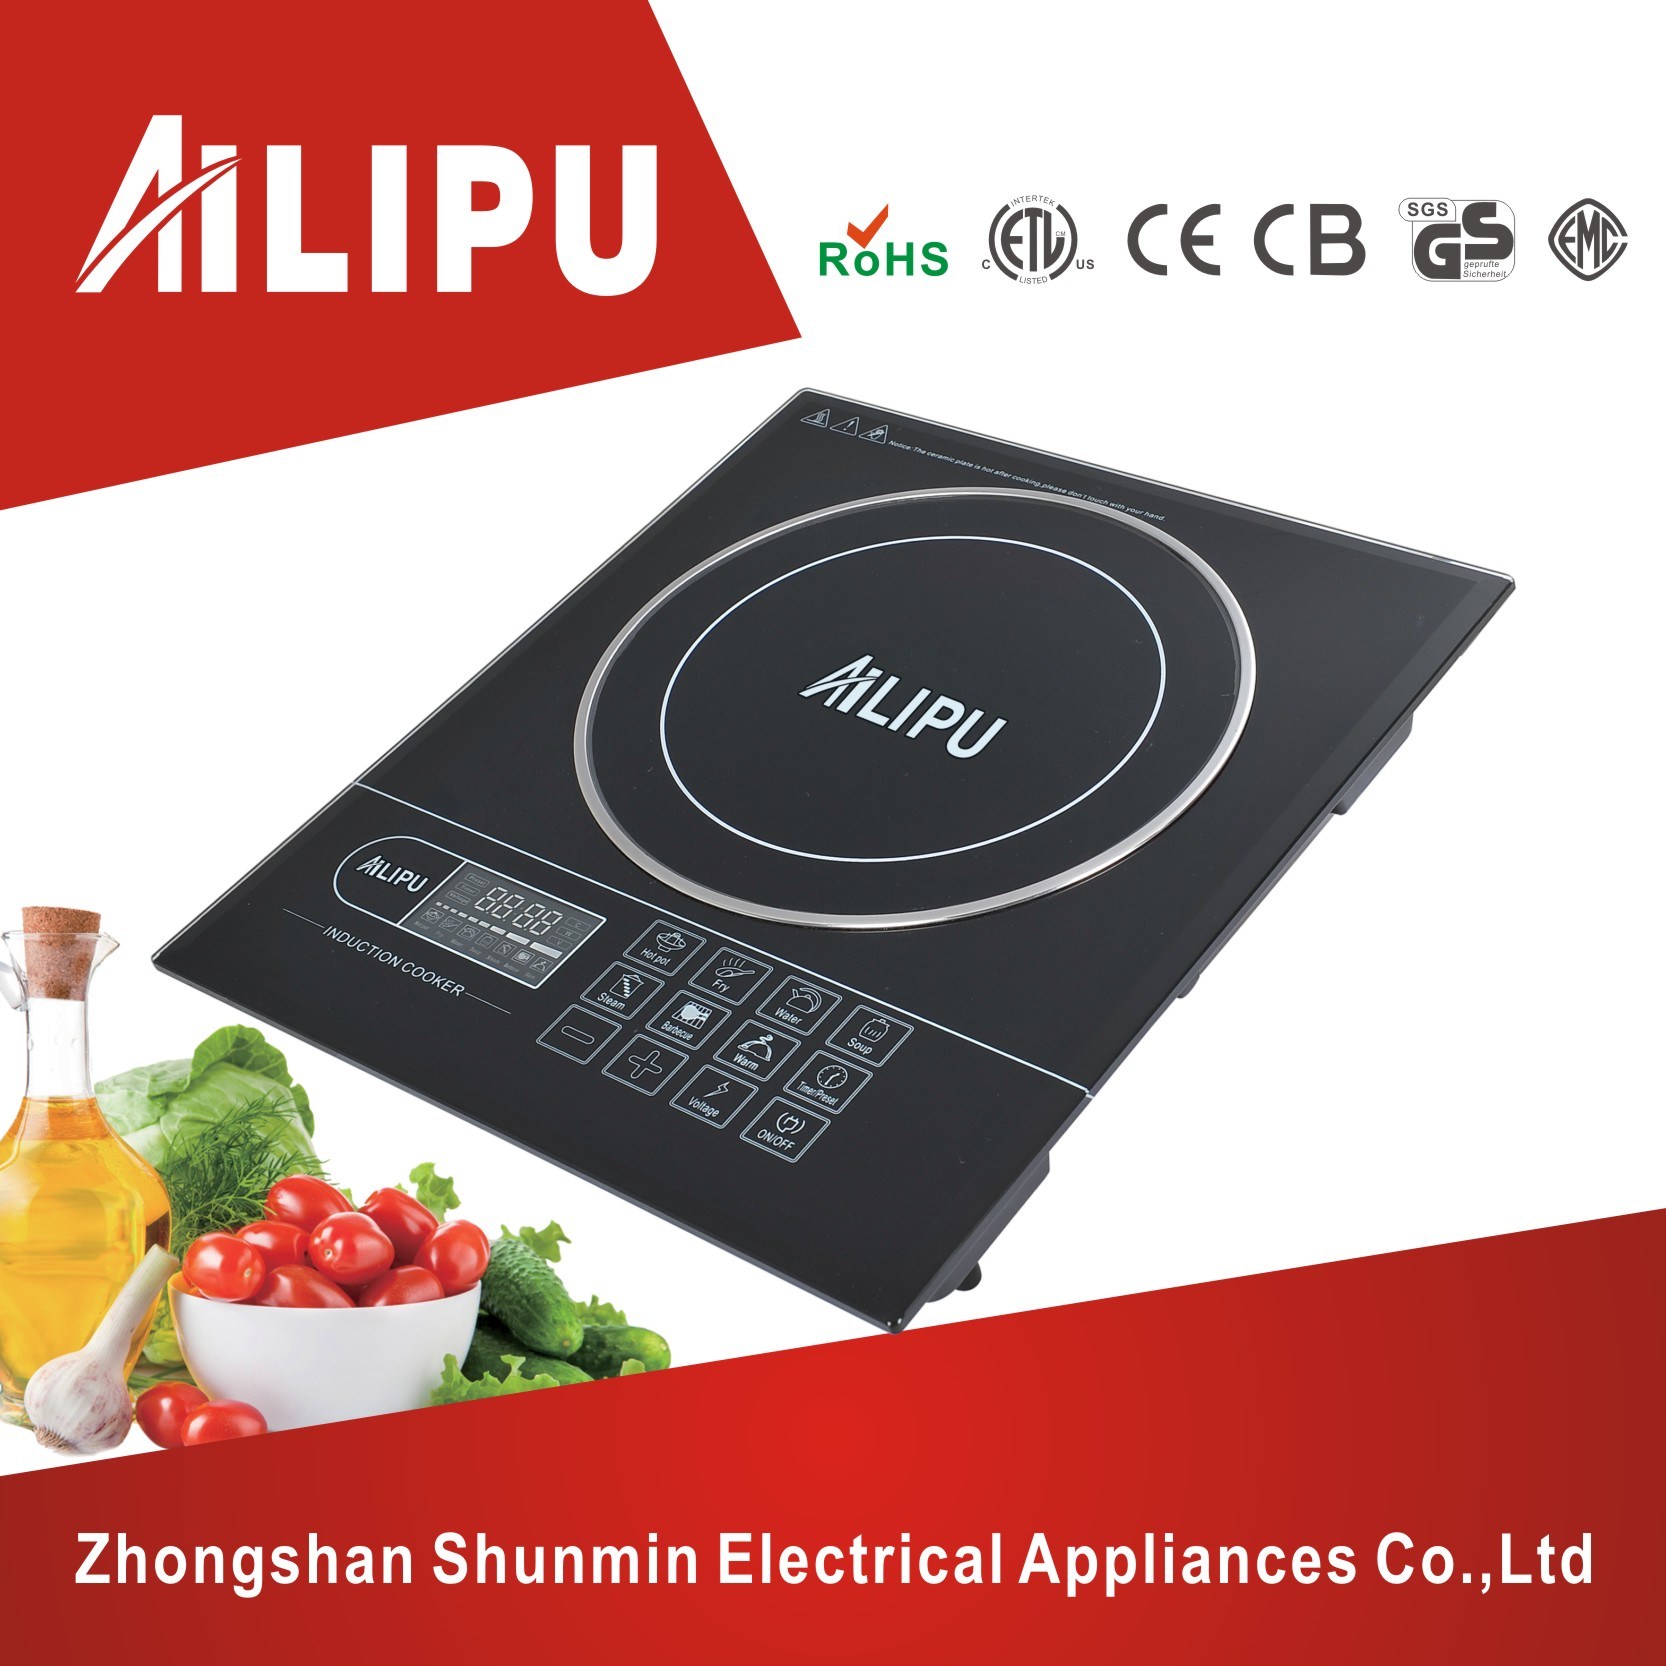 ABS Housing Tabletop Induction Cooker/Induction Stove with Auto-Operation Cooling Fan